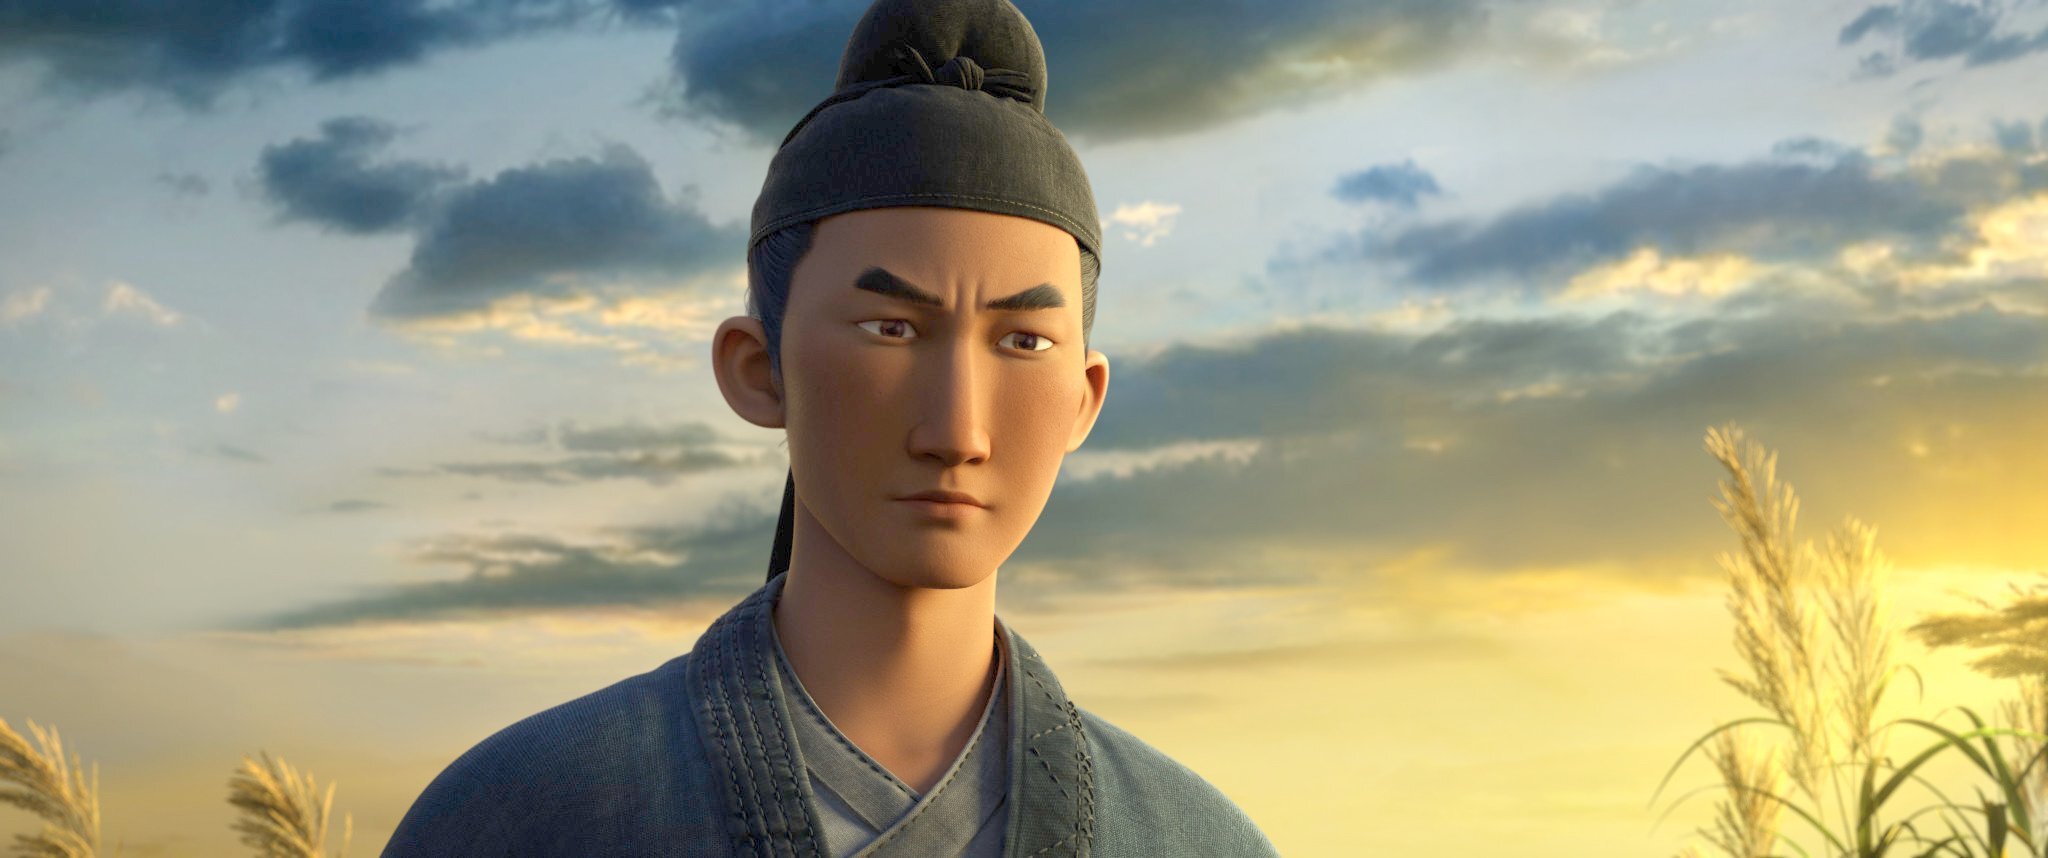 Gao Shi in a still from “Chang An”, the latest blockbuster Chinese animated feature.